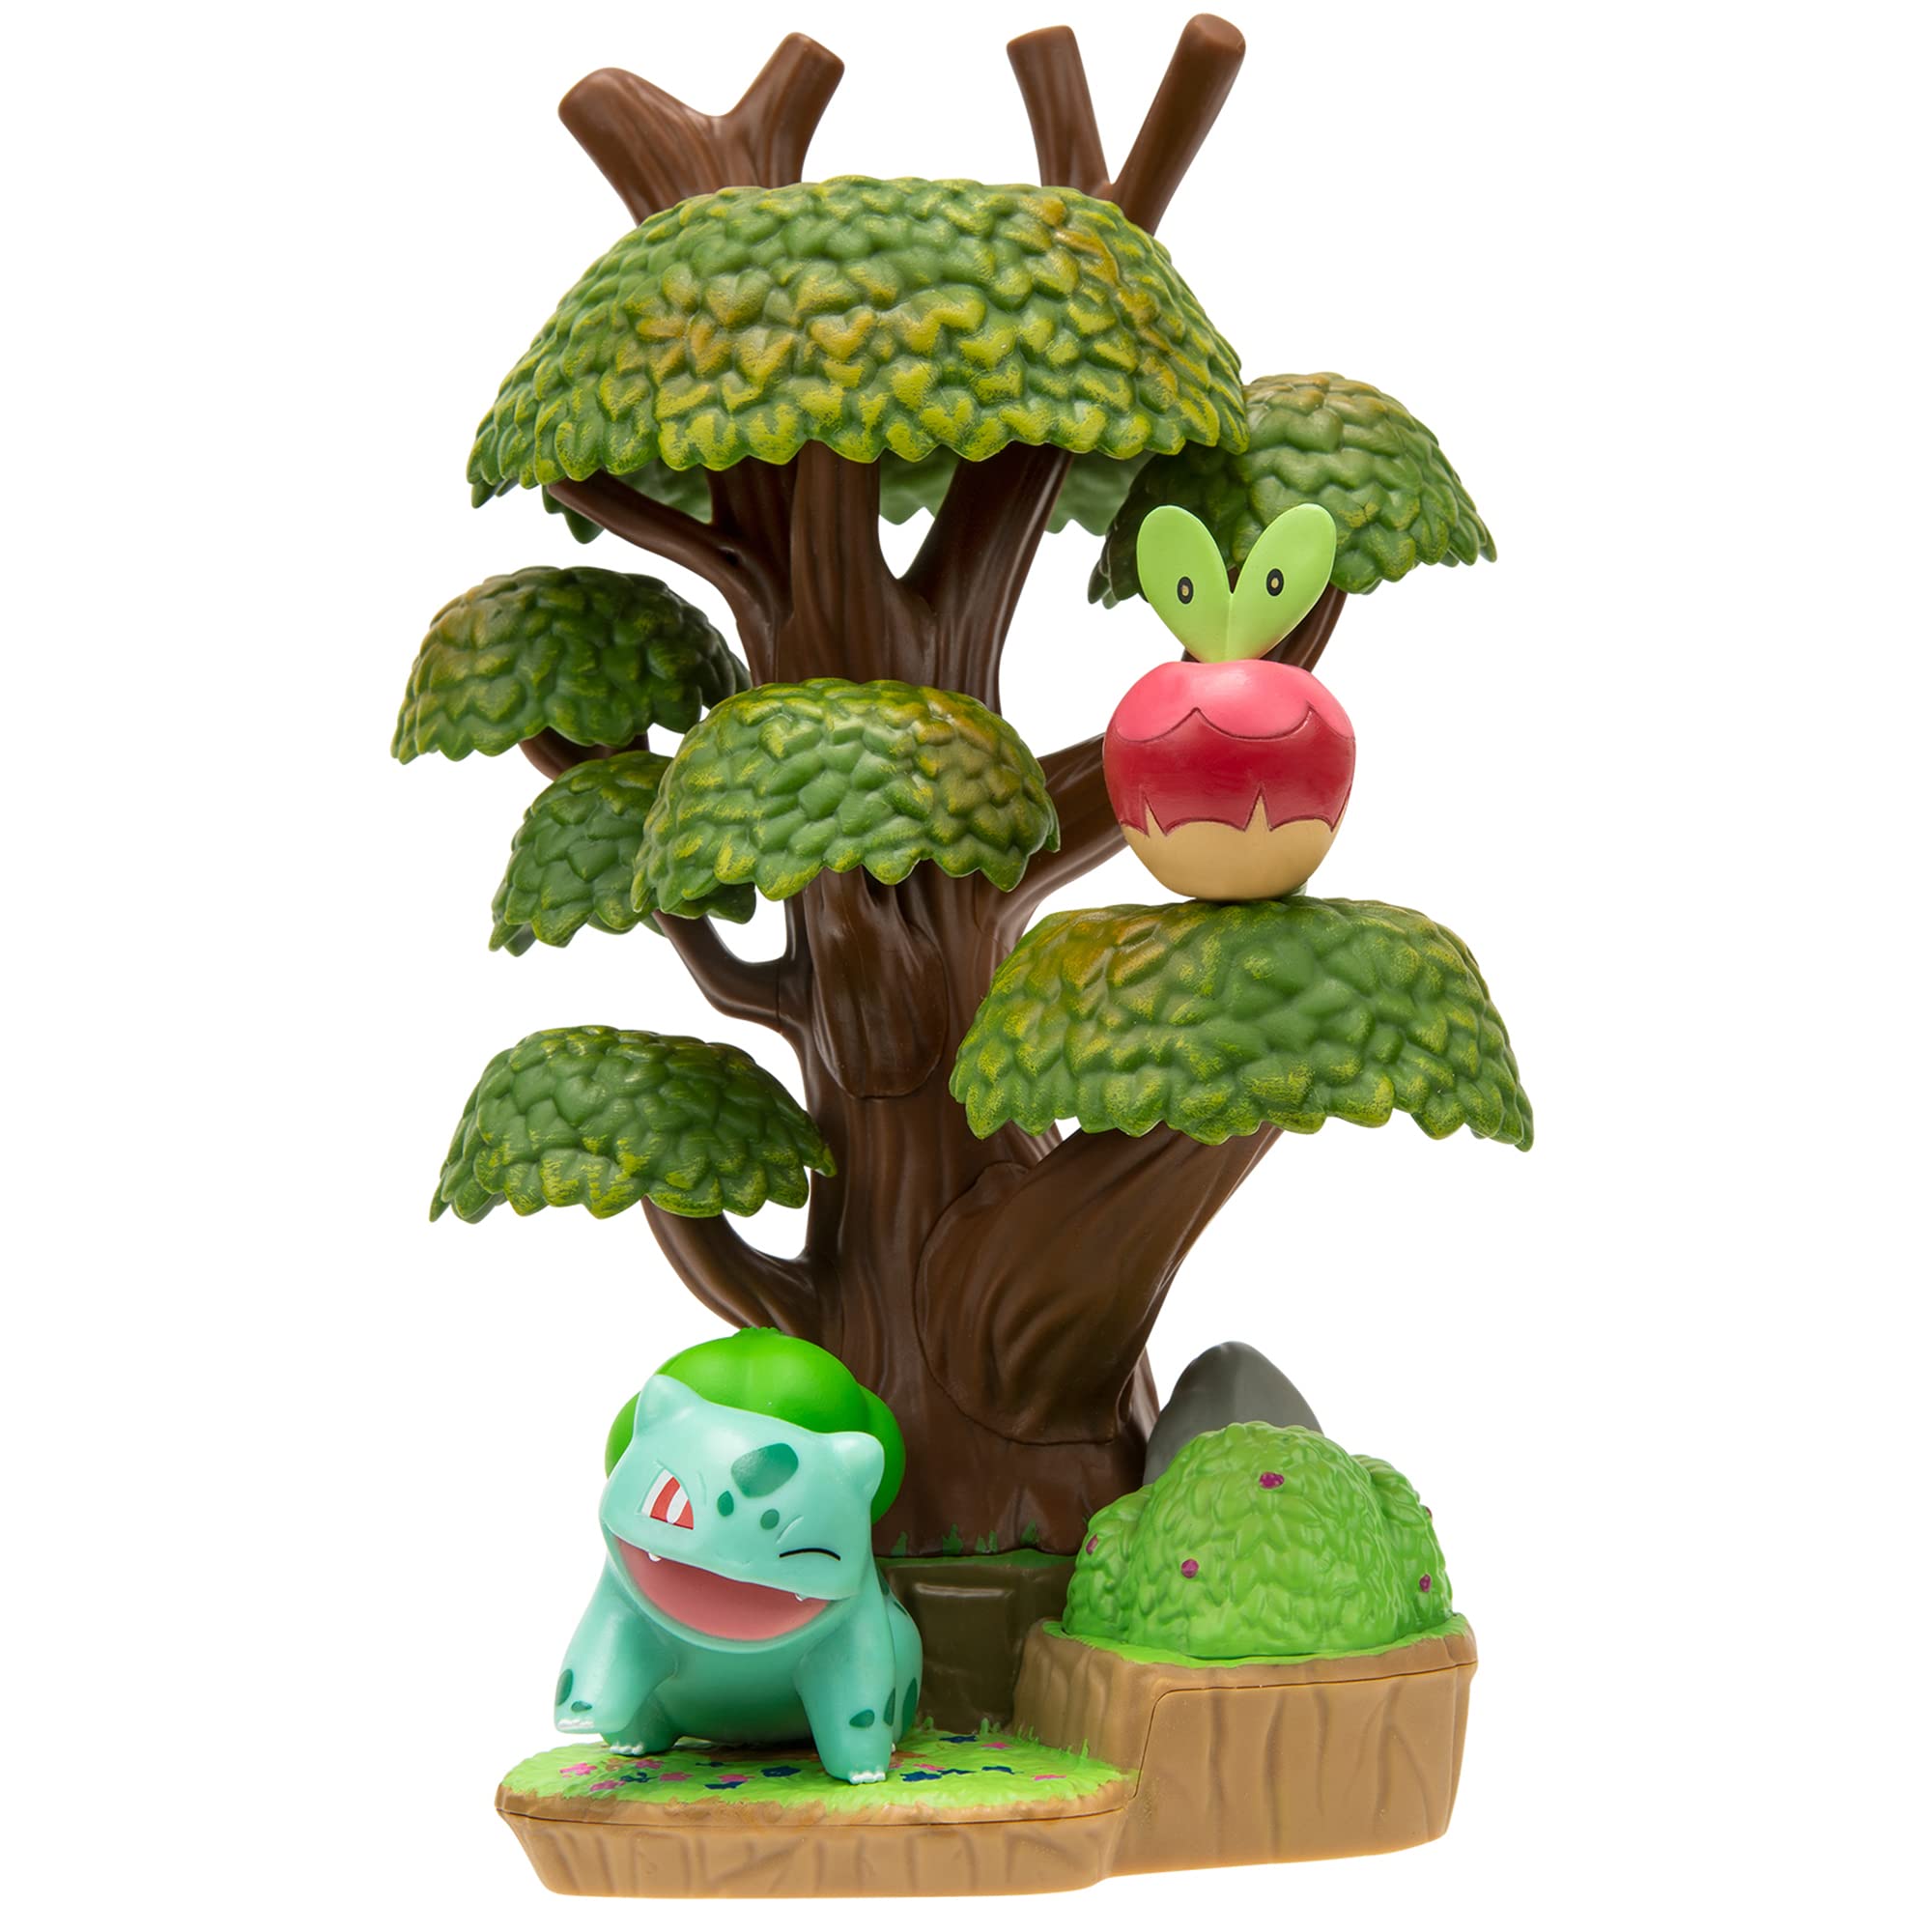 Pokemon Select Forest Environment - Multi-Level Display Set with 2-Inch Bulbasaur and Applin Battle Figures